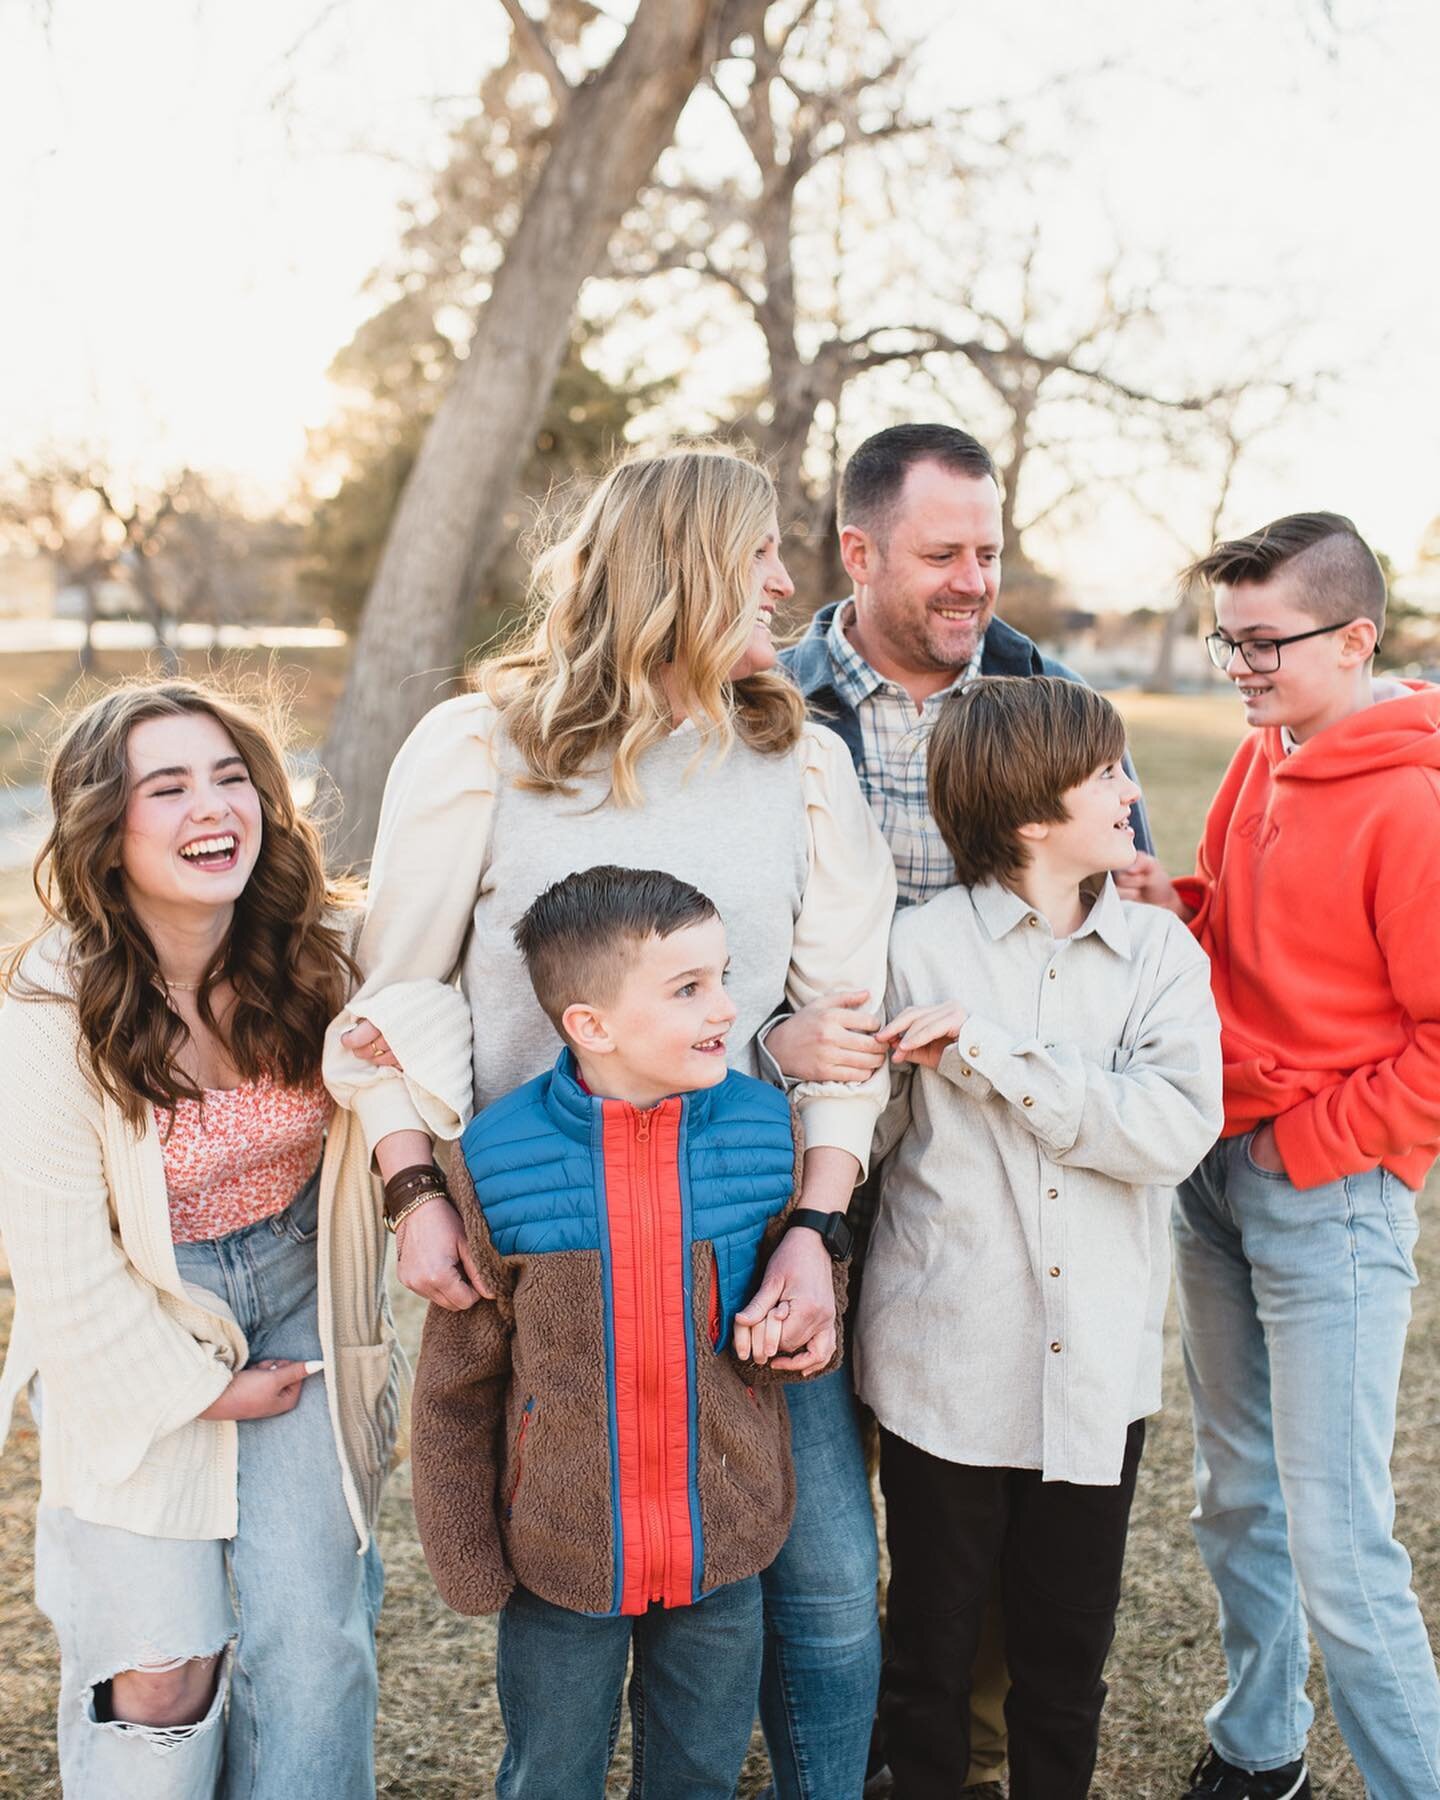 One of my favorite families ever! My favorite part of this session was taking photos of just mom and dad, seeing their 11 year old son in the background carrying a huge tree branch then calling out, &ldquo;Hey look mom! I found a mistletoe!&rdquo; 🤣